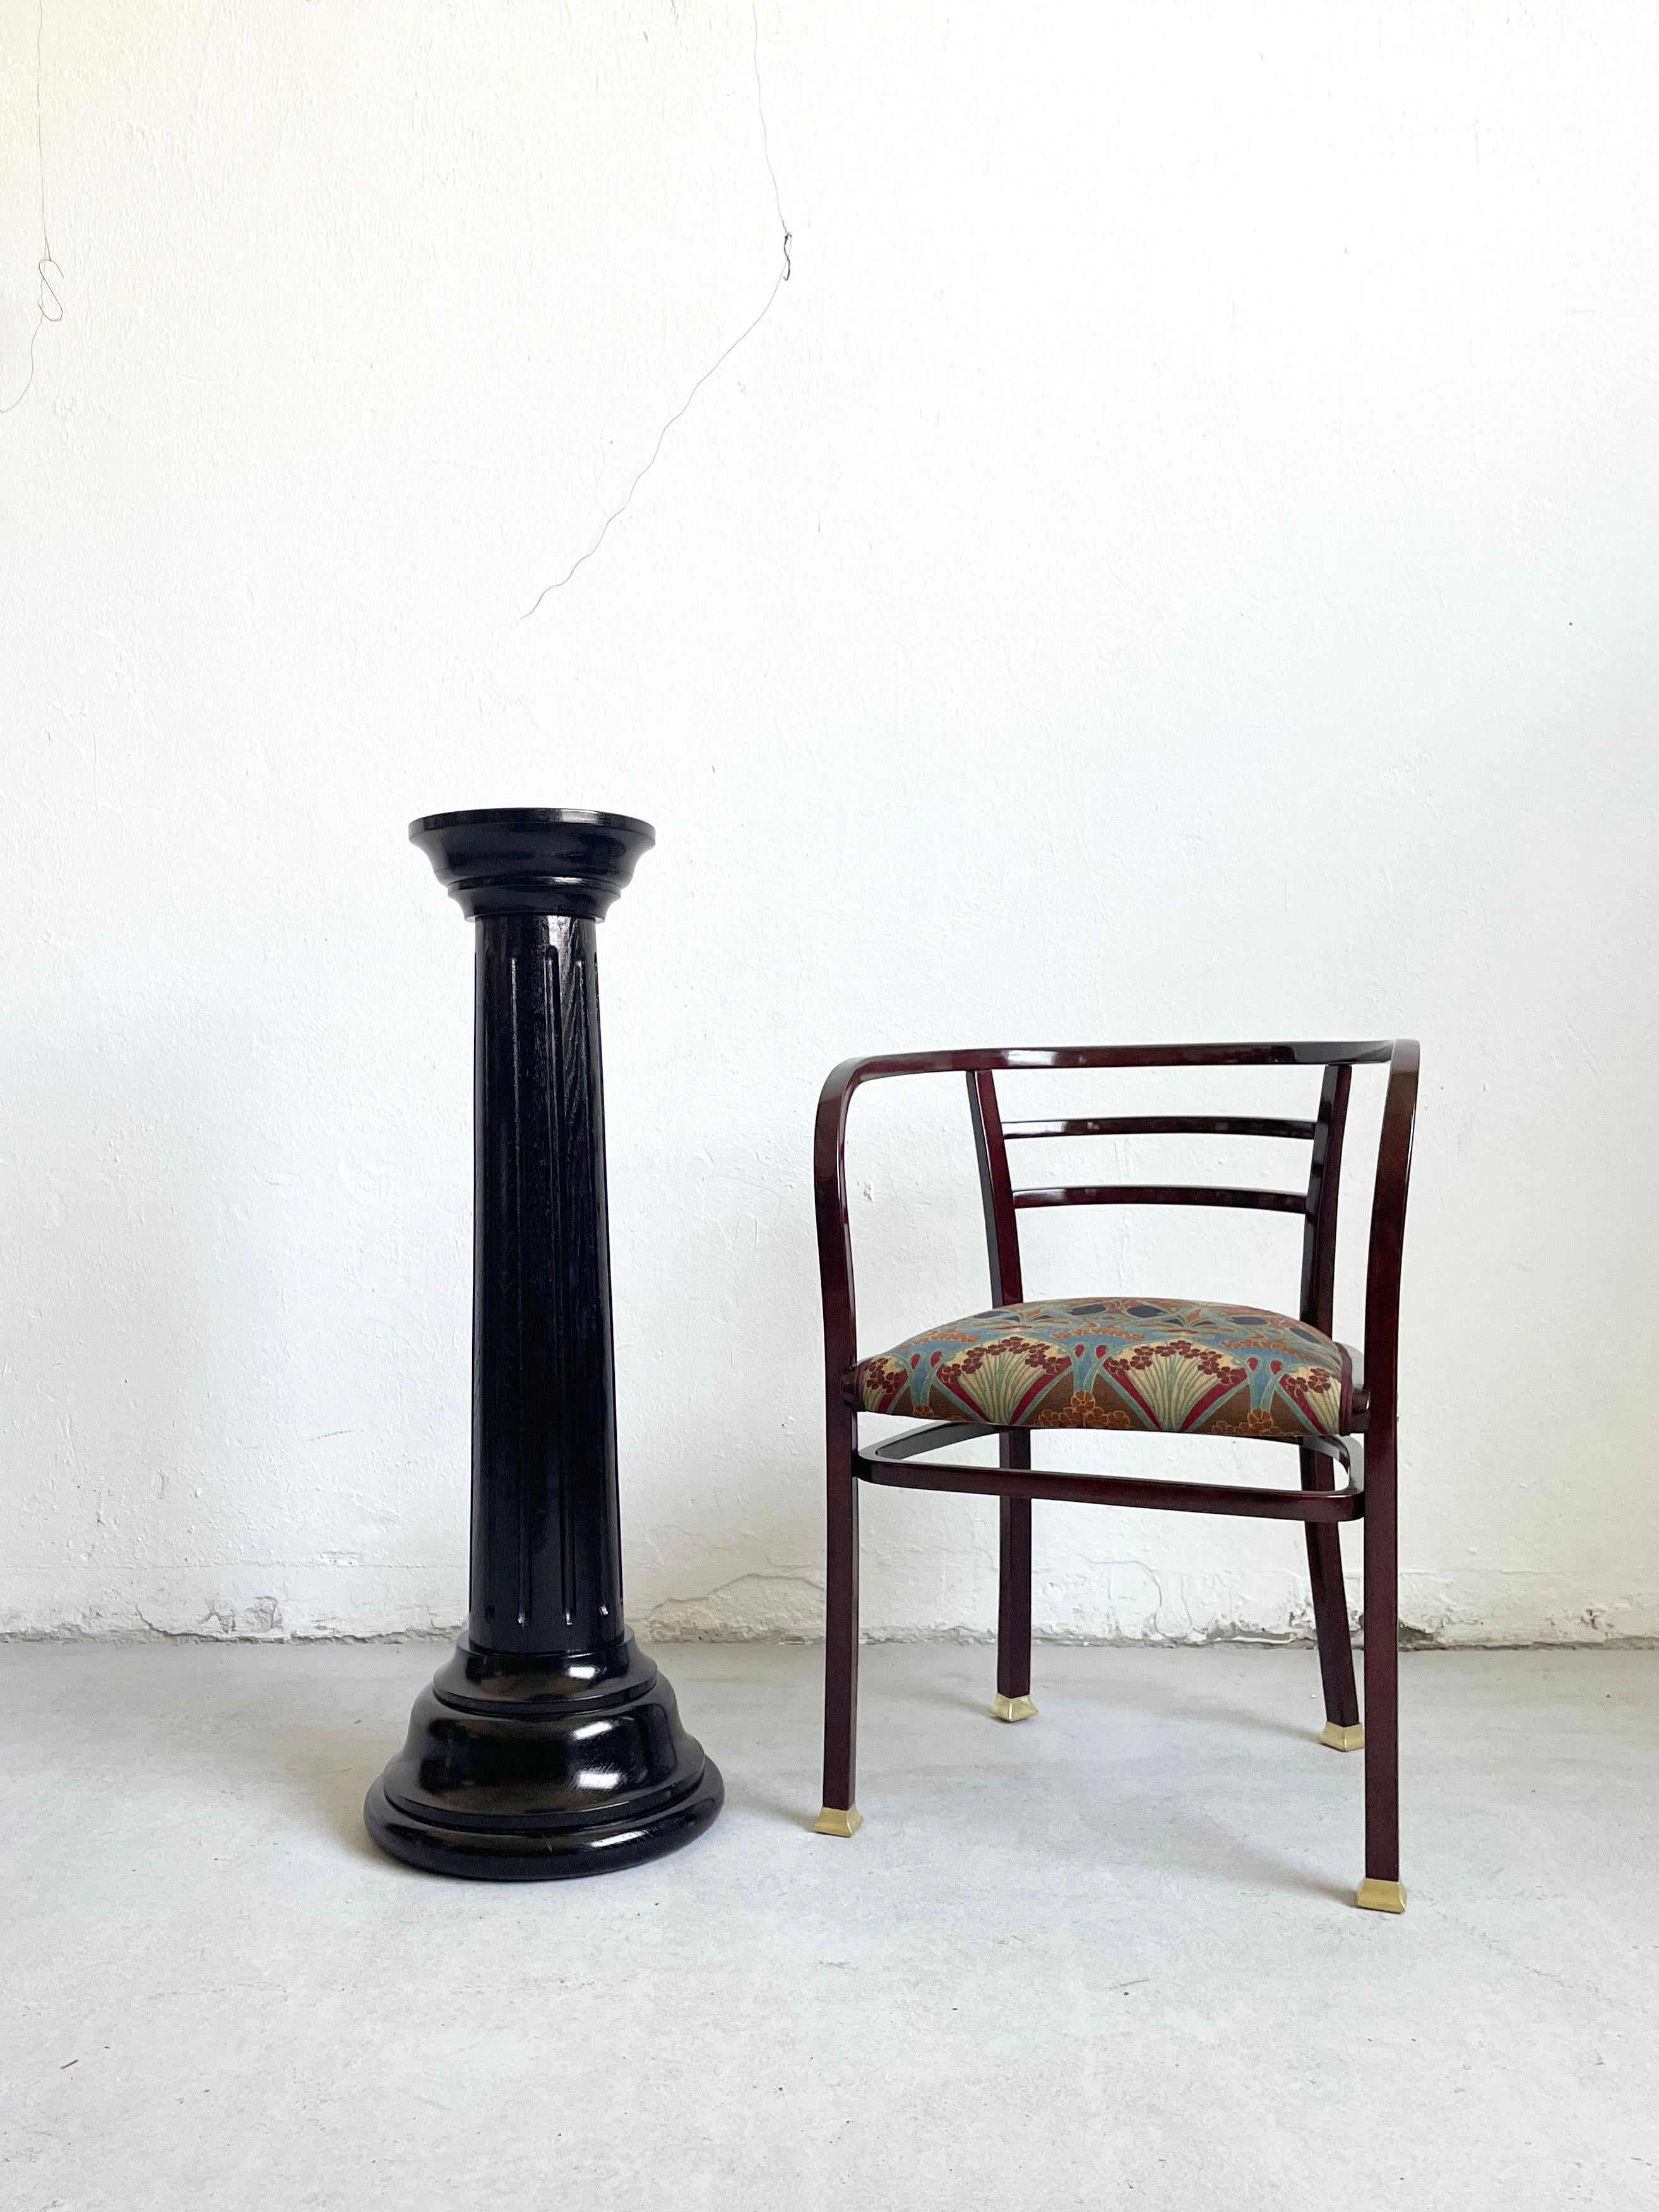 Fully restored neoclassical column shaped pedestal or stand handcrafted between the late 19th century and early 20th century

Made of oak in black color, refinished with shellac

The pedestal has been beautifully restored and remains in